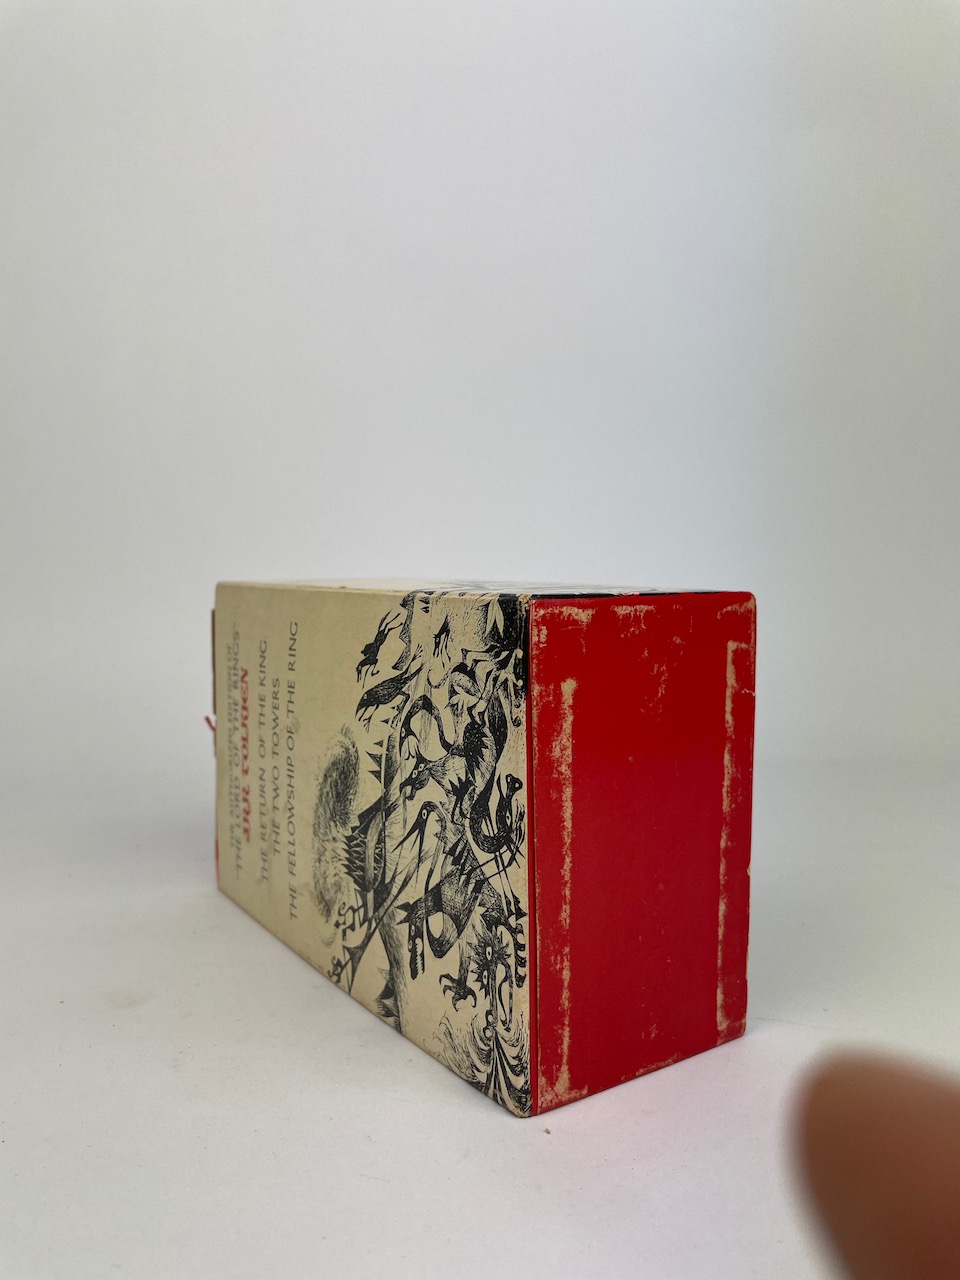 The Lord of the Rings from 1968, Authorized Edition in Black, White and Red Publishers Slipcase 7